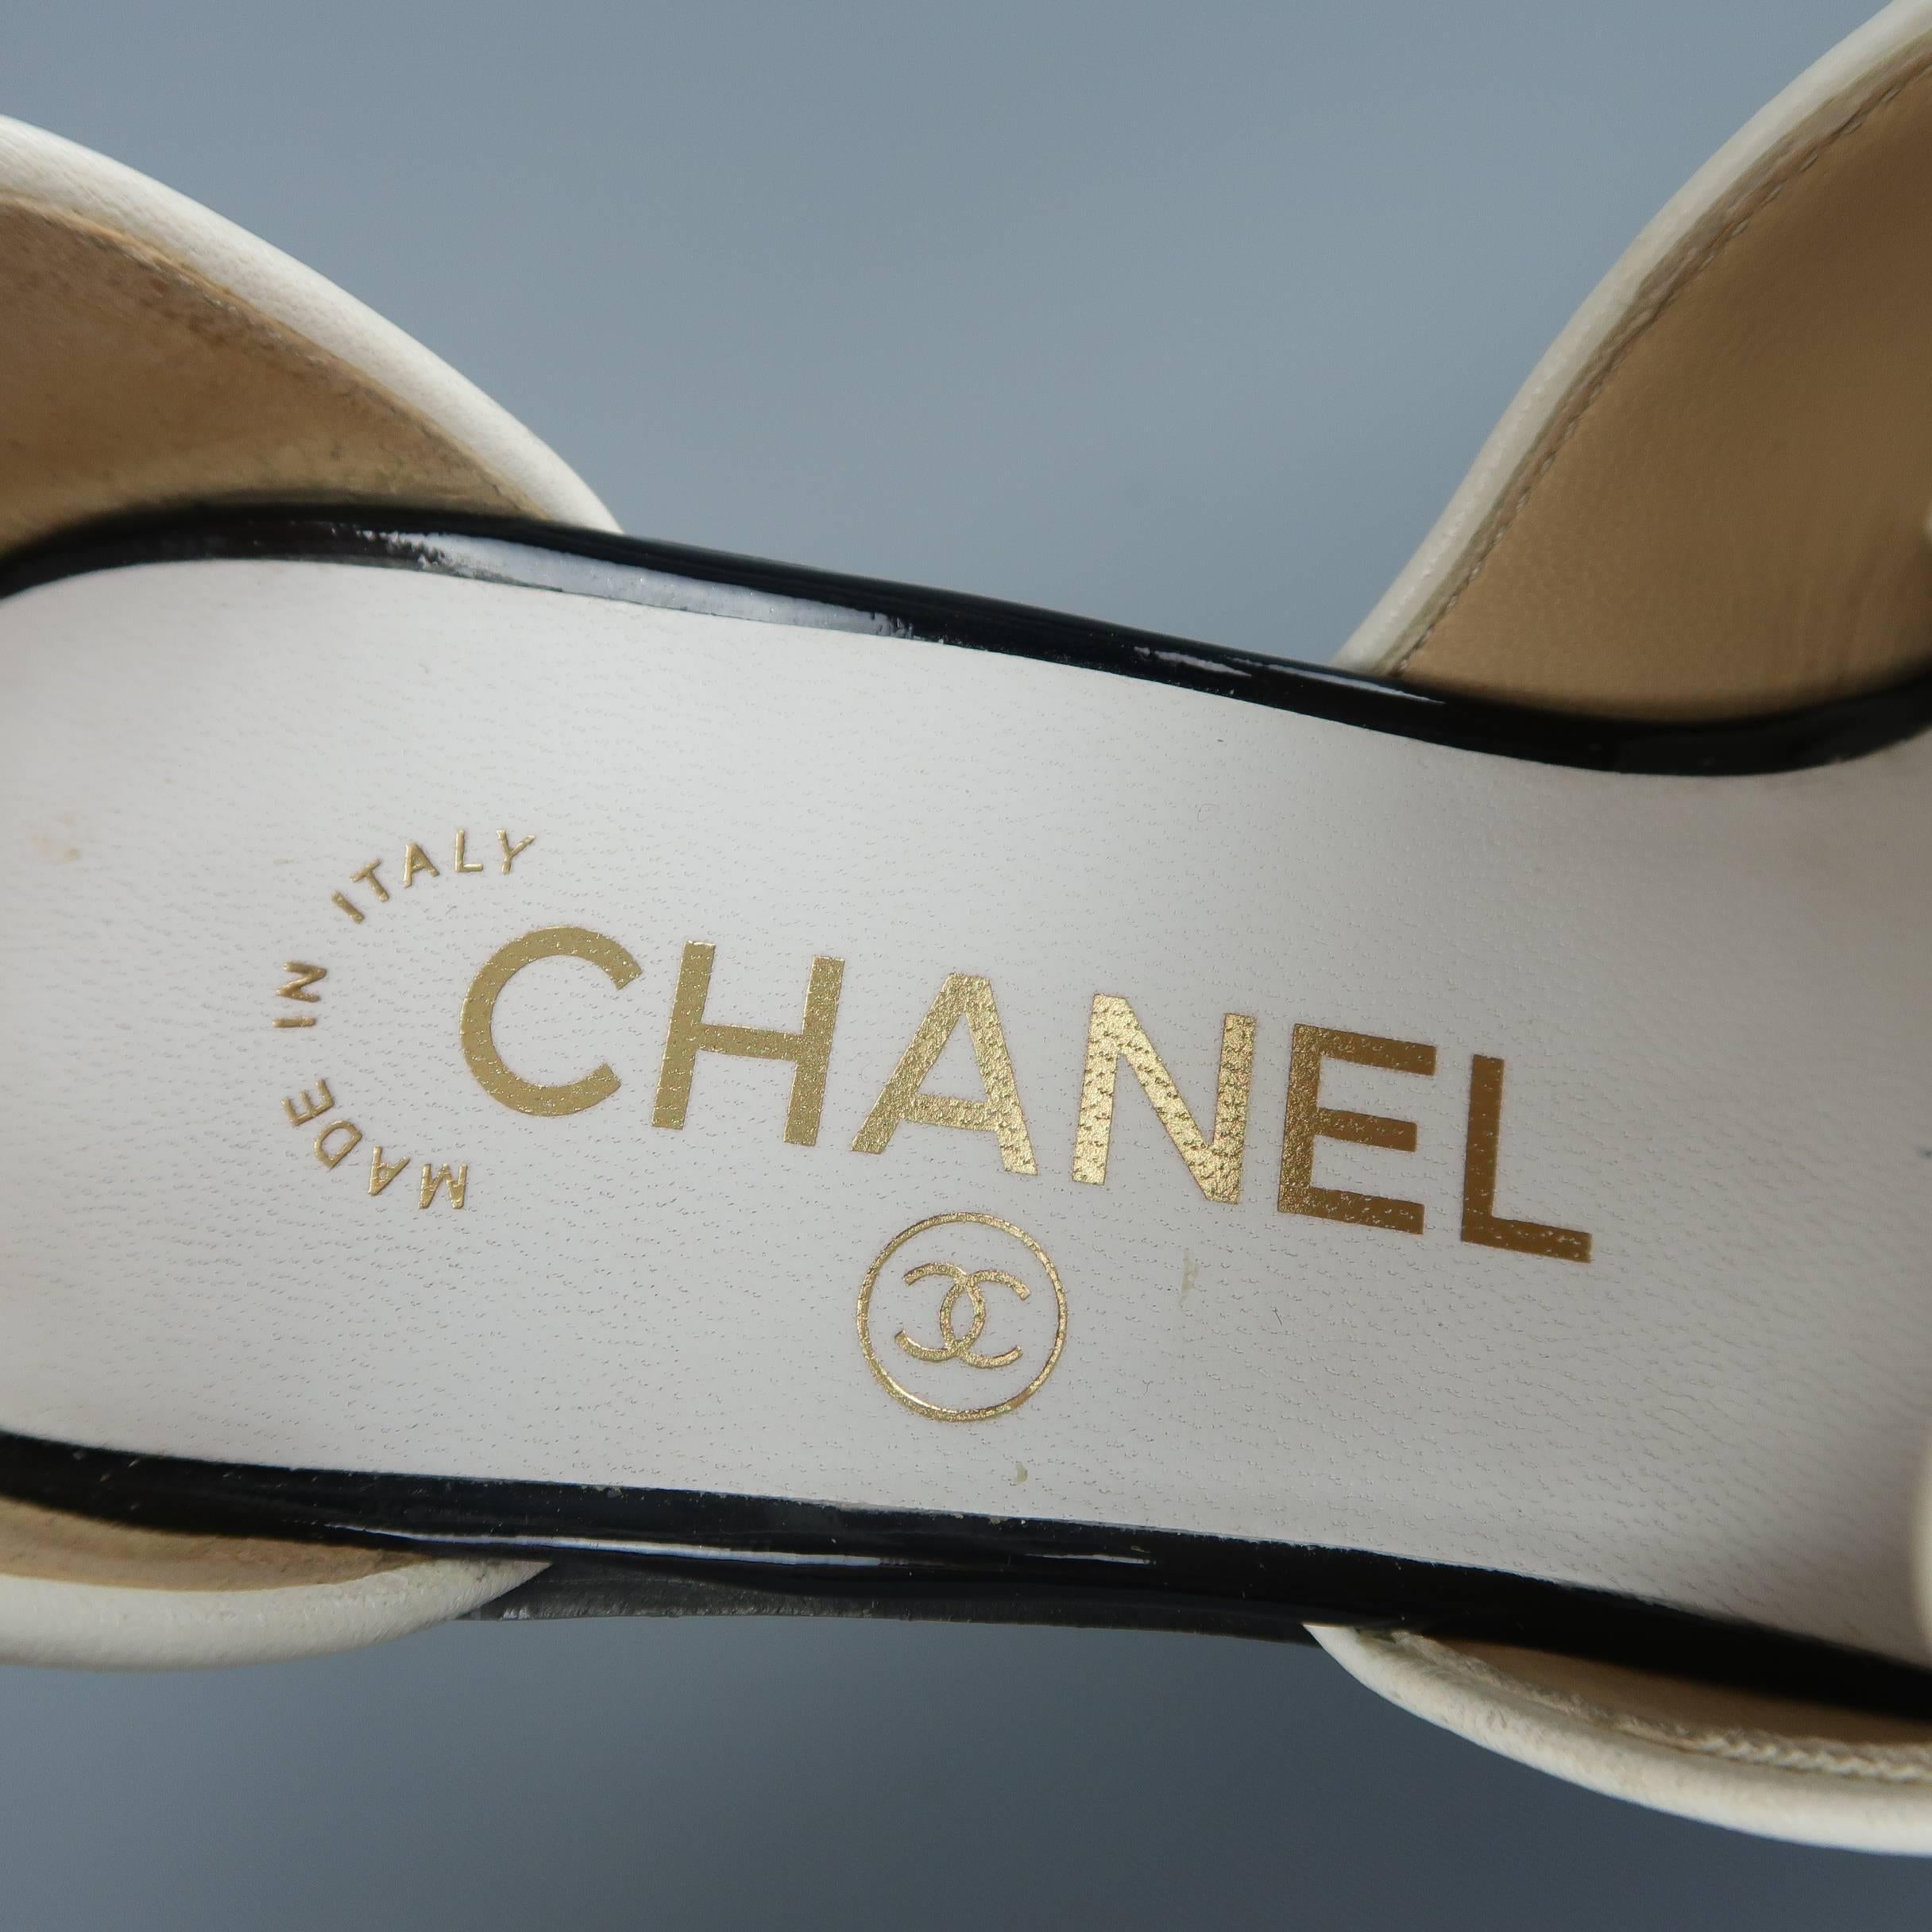 CHANEL Size 5.5 Black & White Leather Ankle Strap Loafer Flats 1